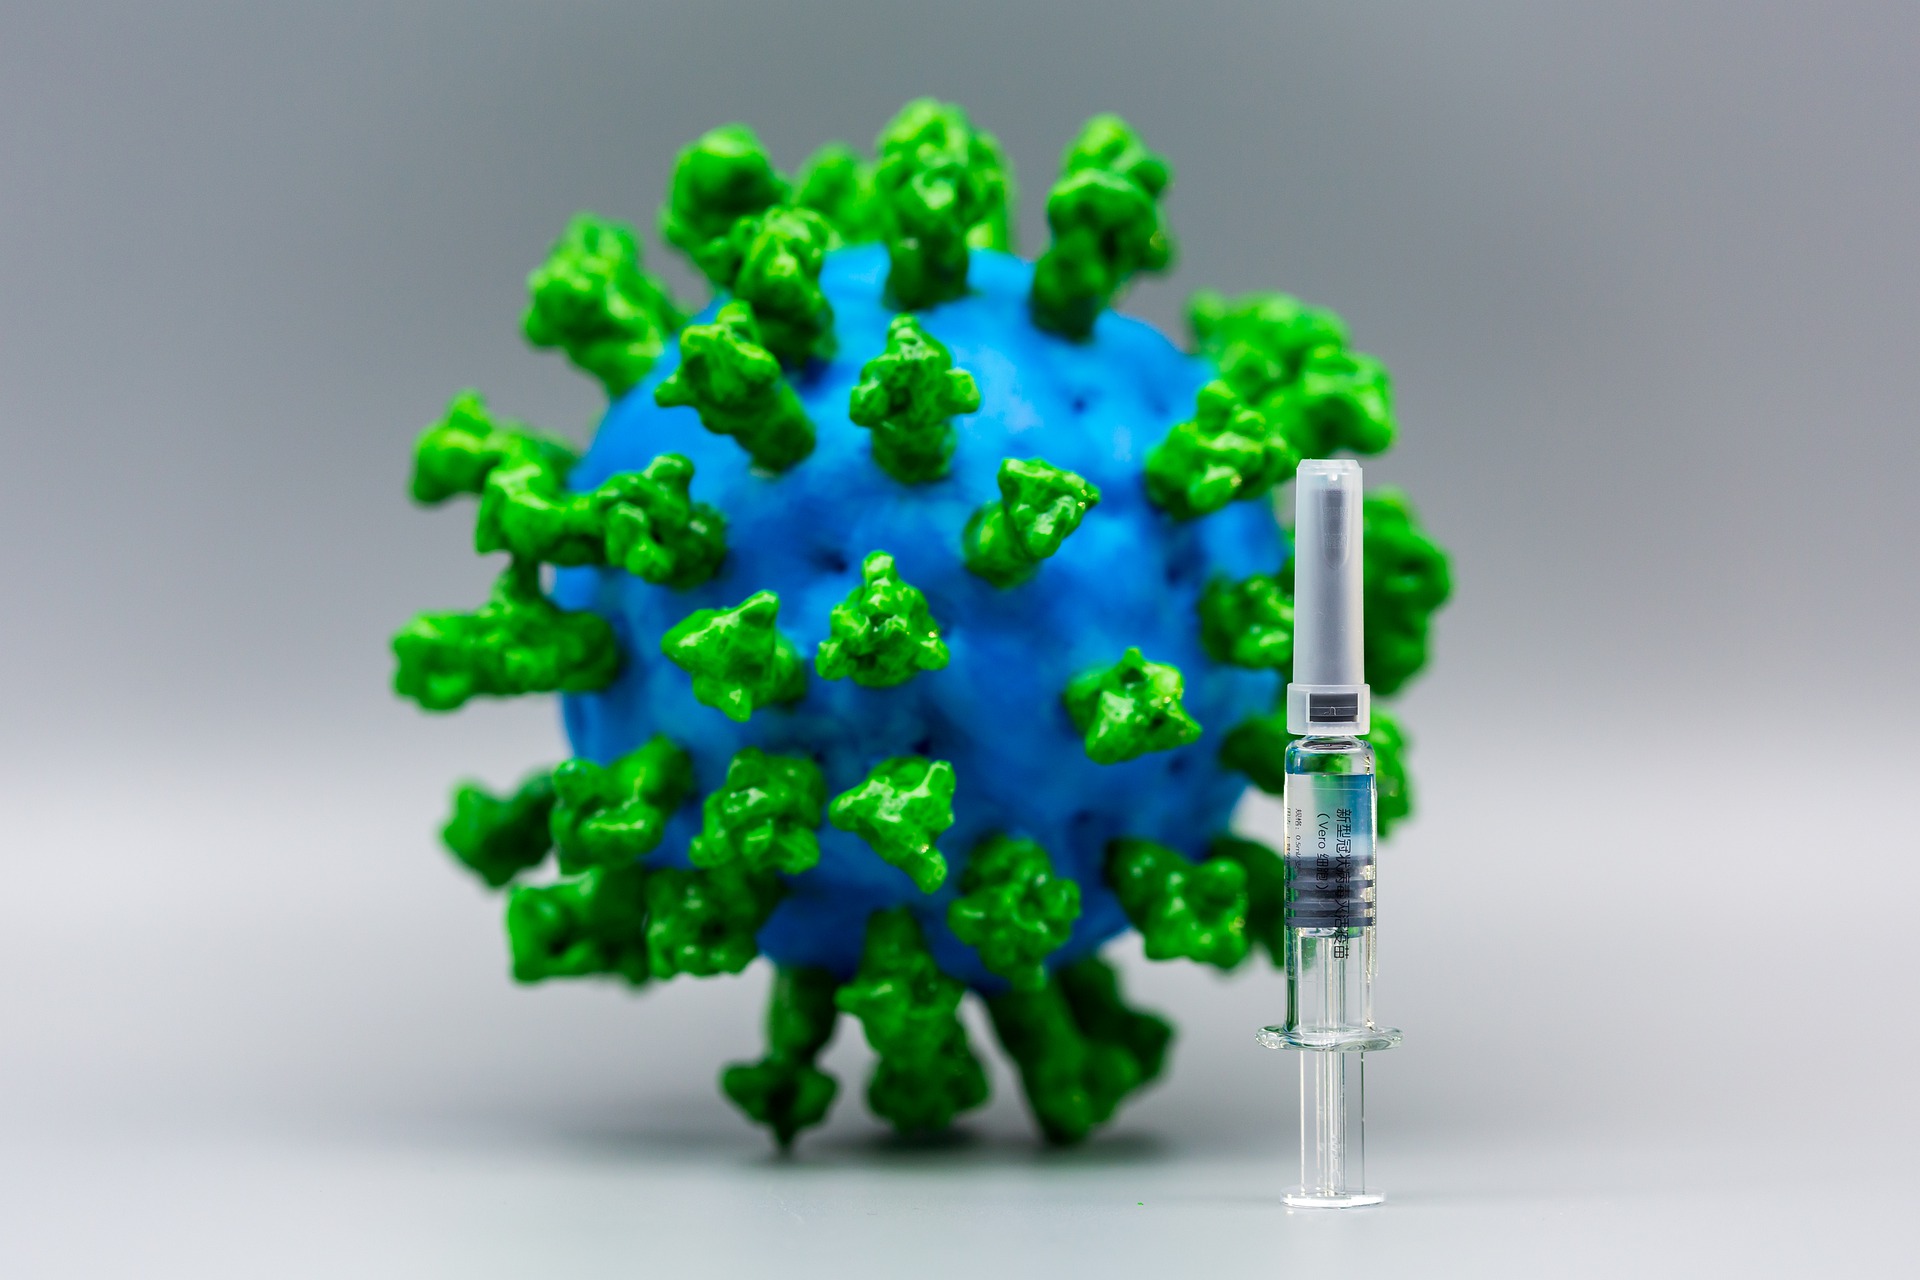 COVID19 vaccine coming soon: here’s what you need to know - Part 1